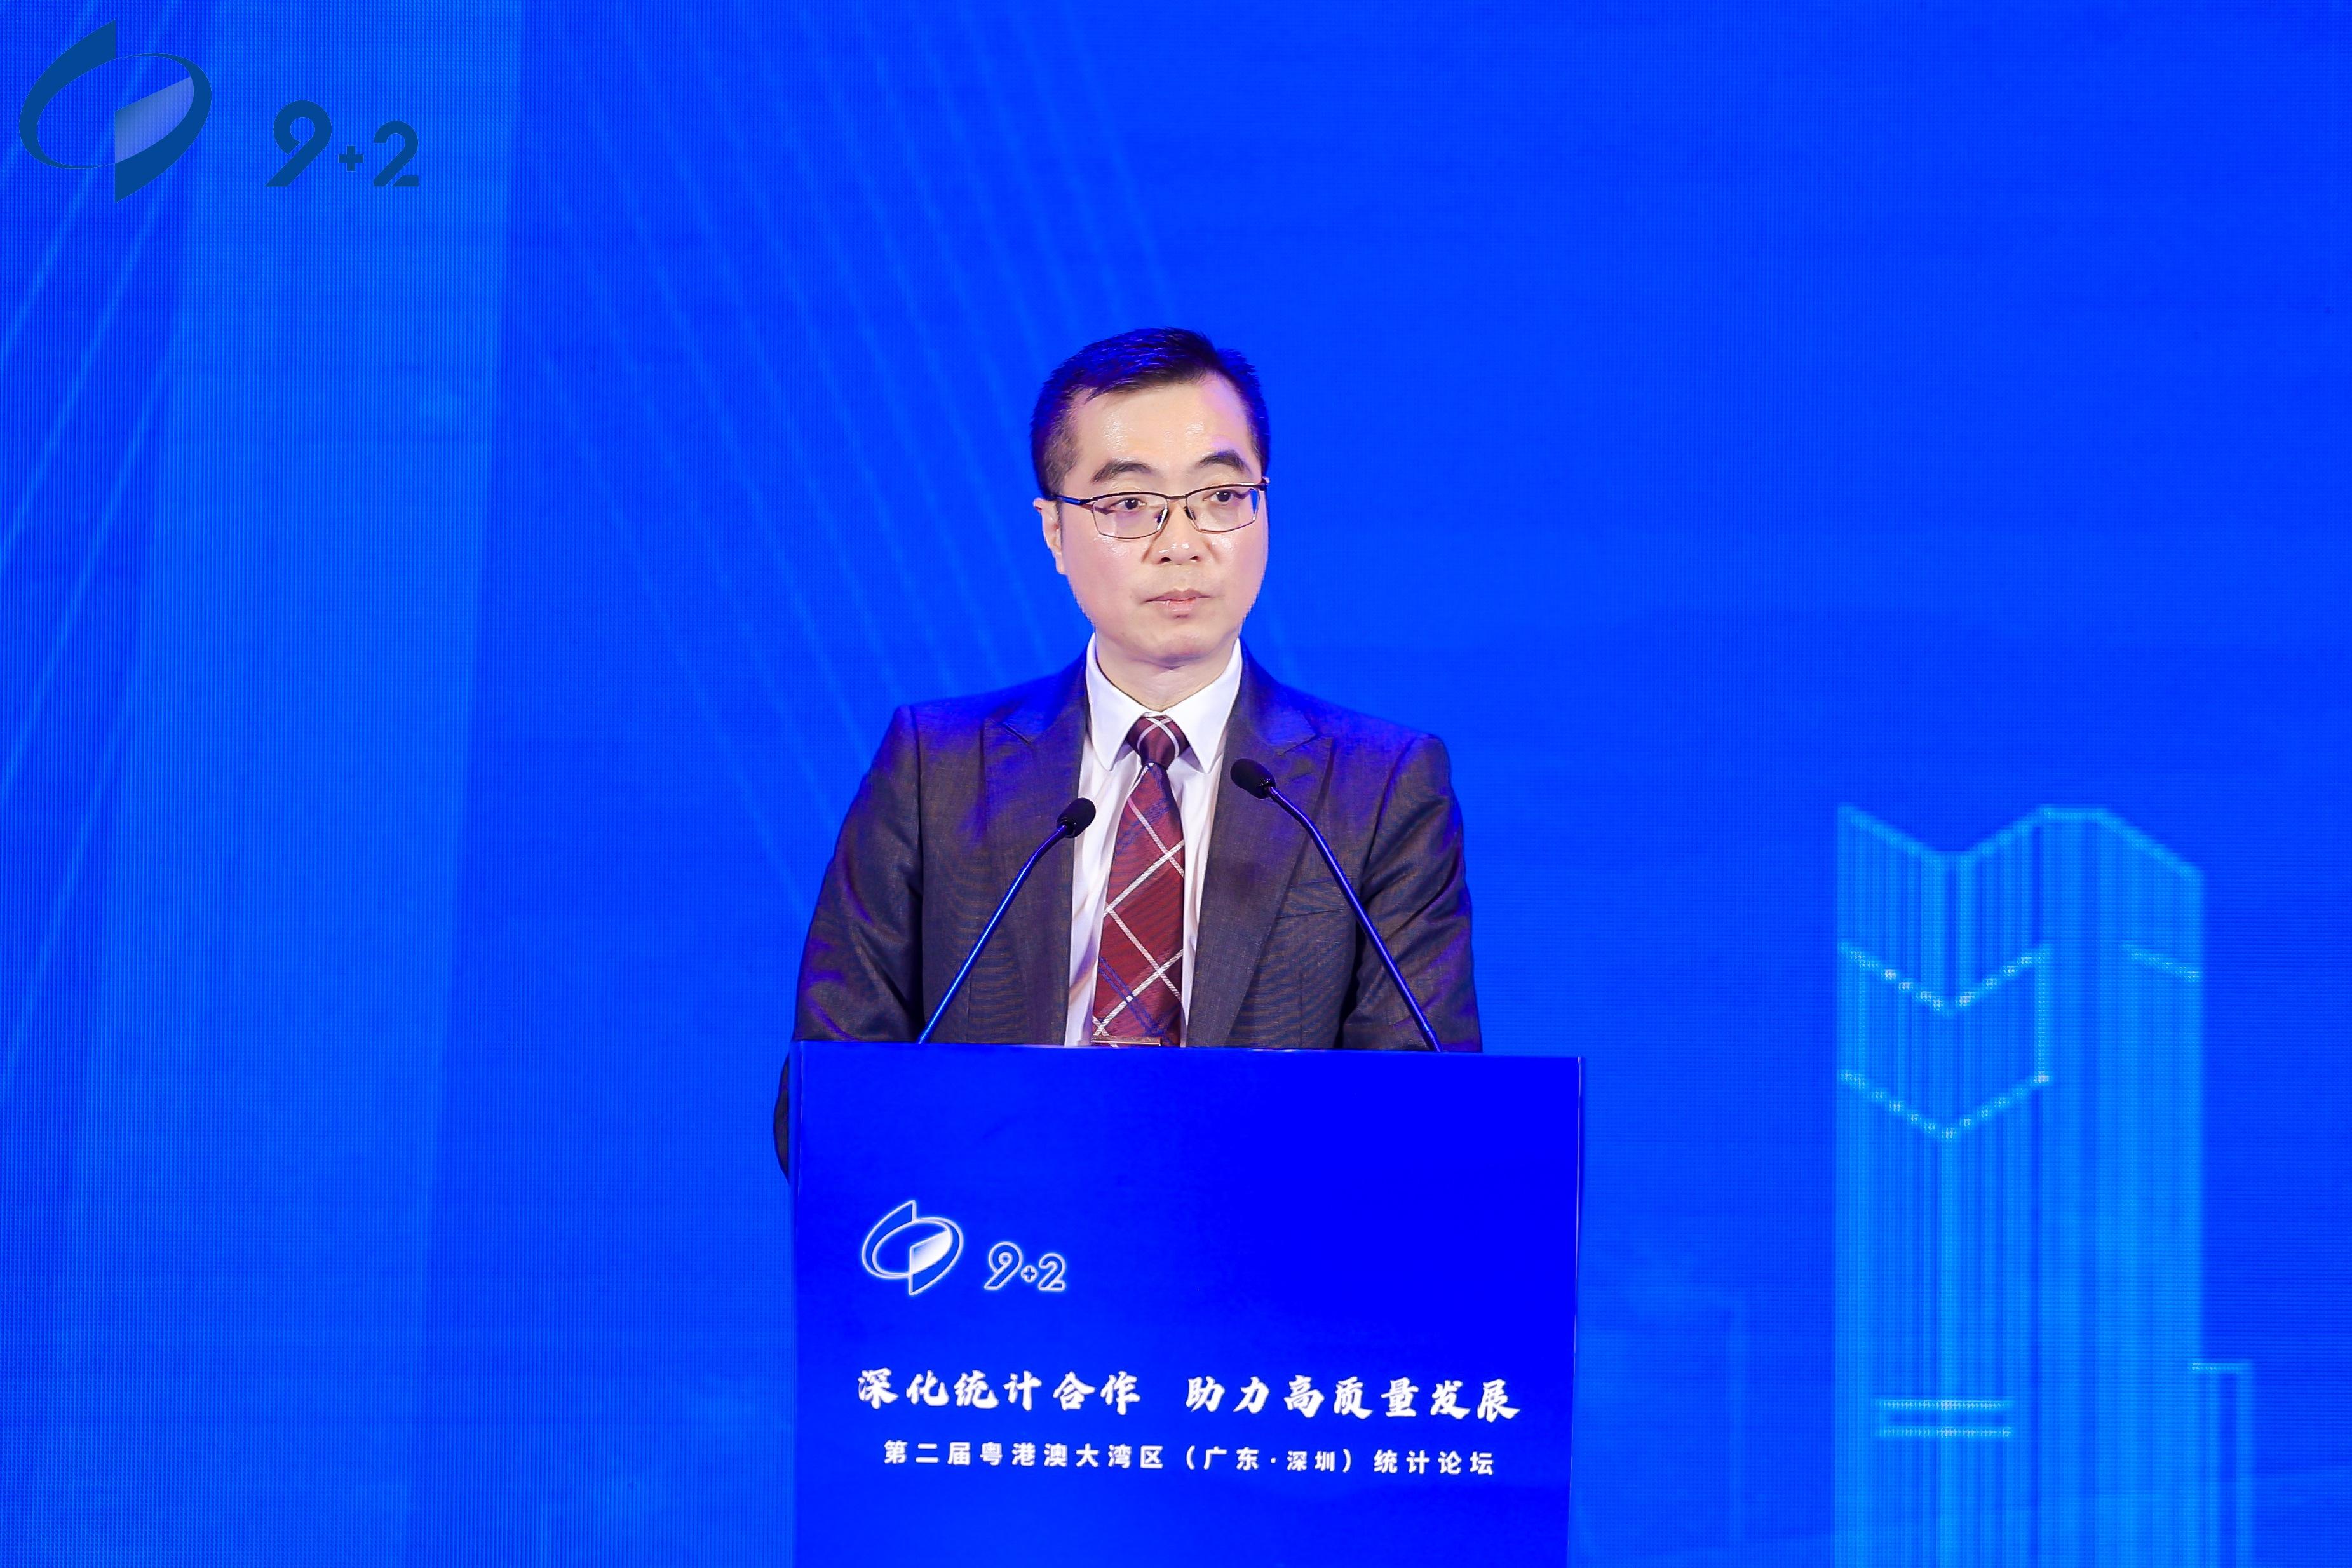 The Commissioner for Census and Statistics, Mr Leo Yu, delivered a speech at the opening ceremony of the Second Guangdong-Hong Kong-Macao Greater Bay Area (Guangdong) Statistical Forum on October 24.